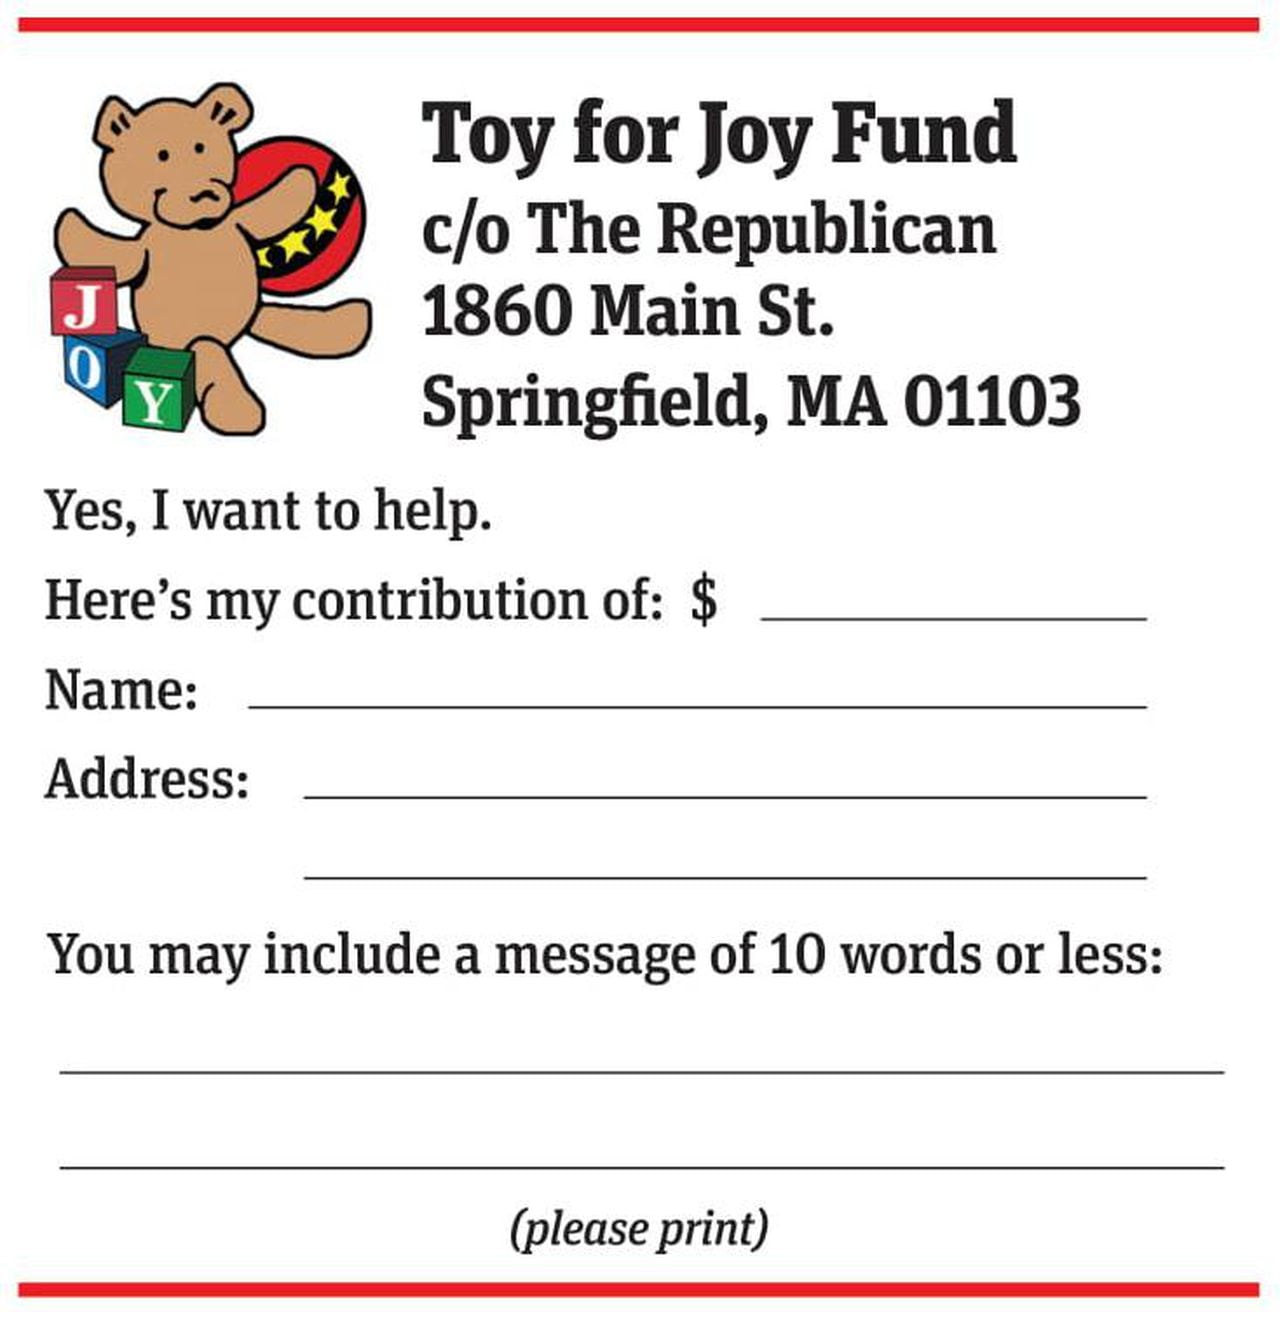  Toy for Joy coupon